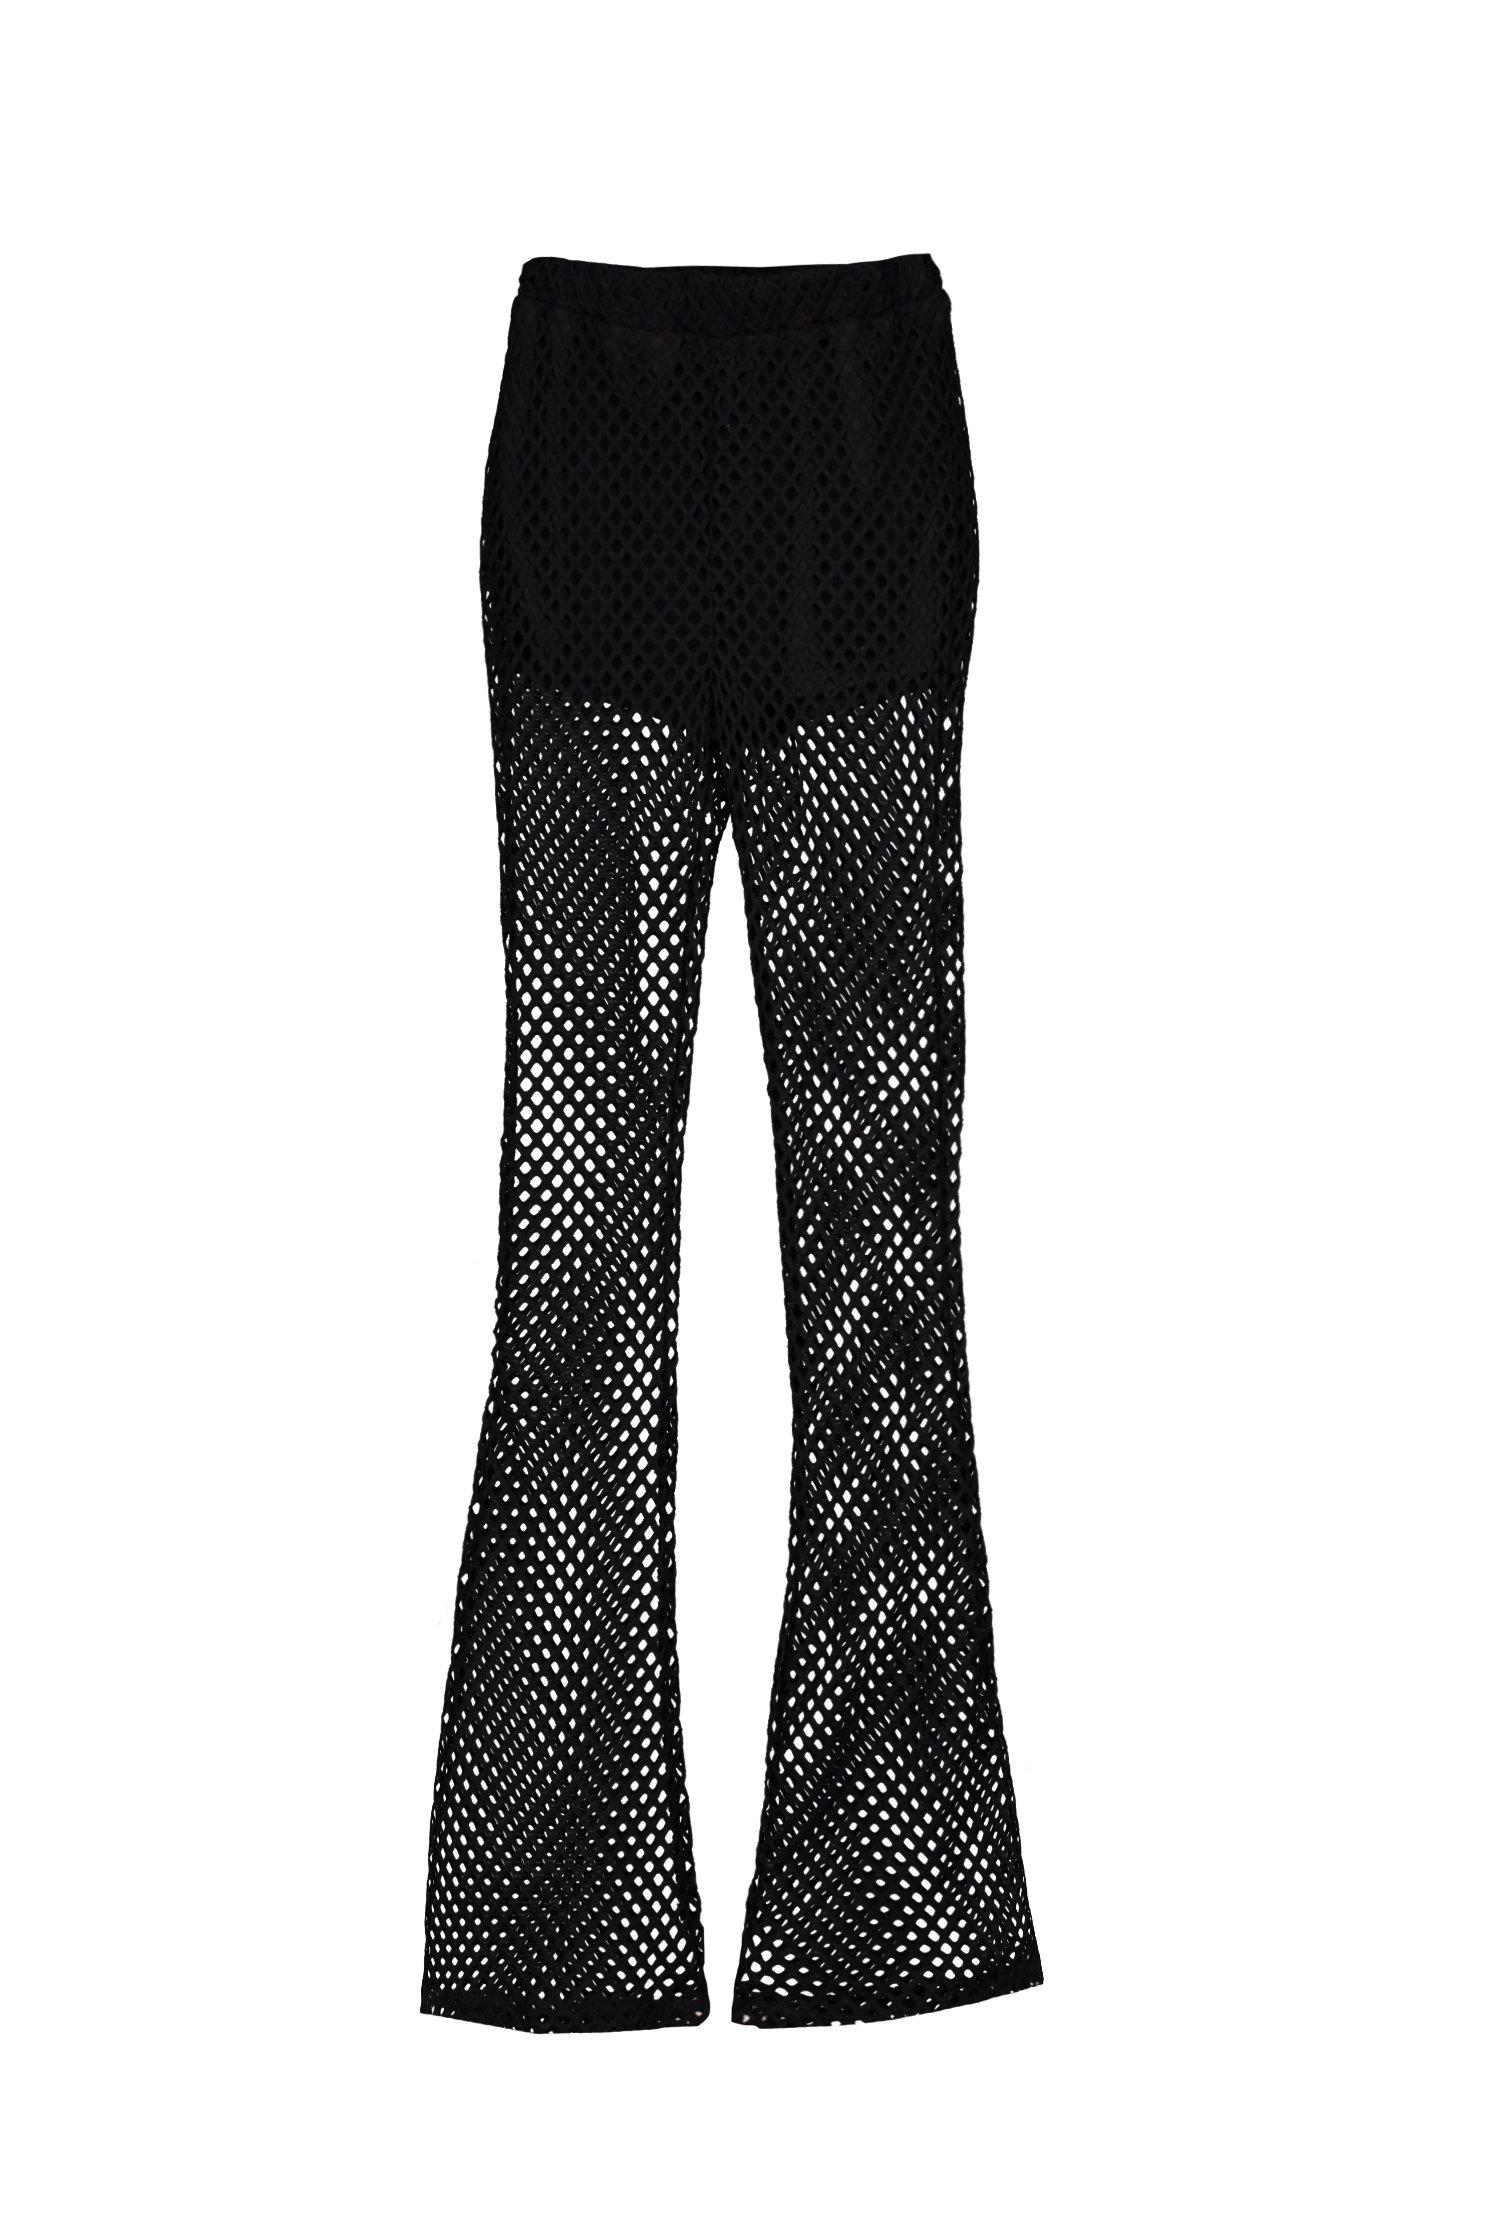 Can You Just Net Fishnet Pants